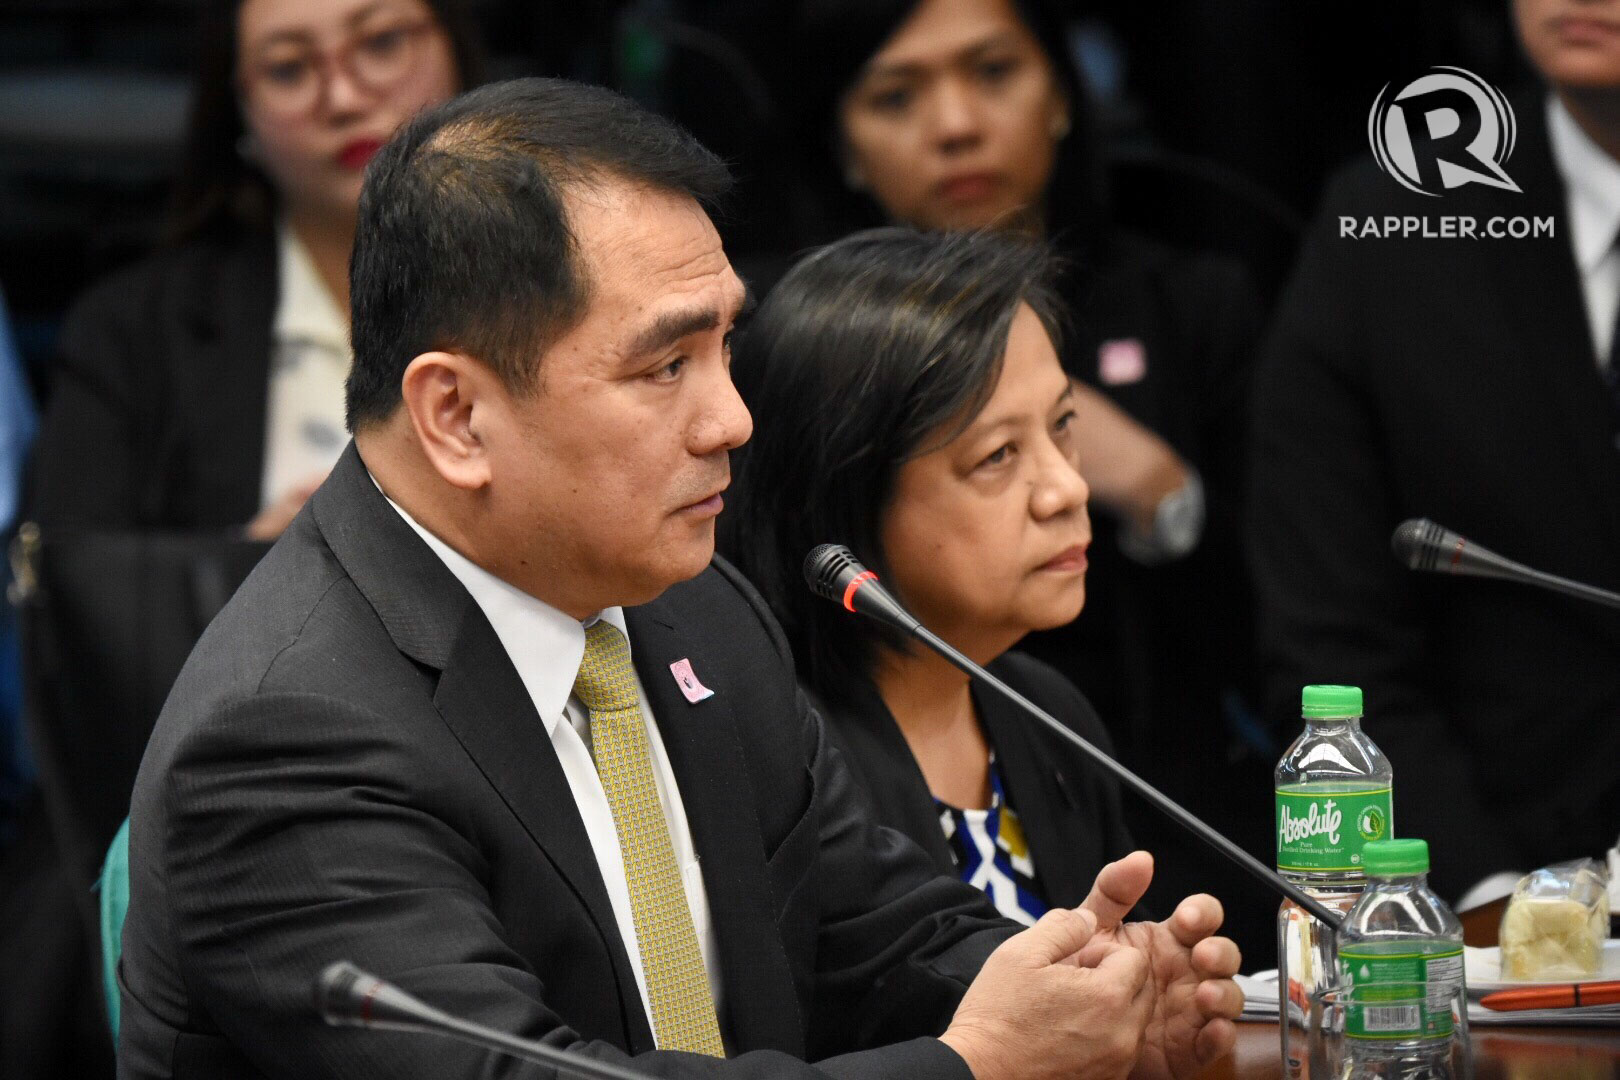 THE DEAN. The UST Faculty of Civil Law Dean Nilo Divina is also accused of being complicit in Castillo's hazing done by his own fraternity, Aegis Juris. Photo by Rappler 